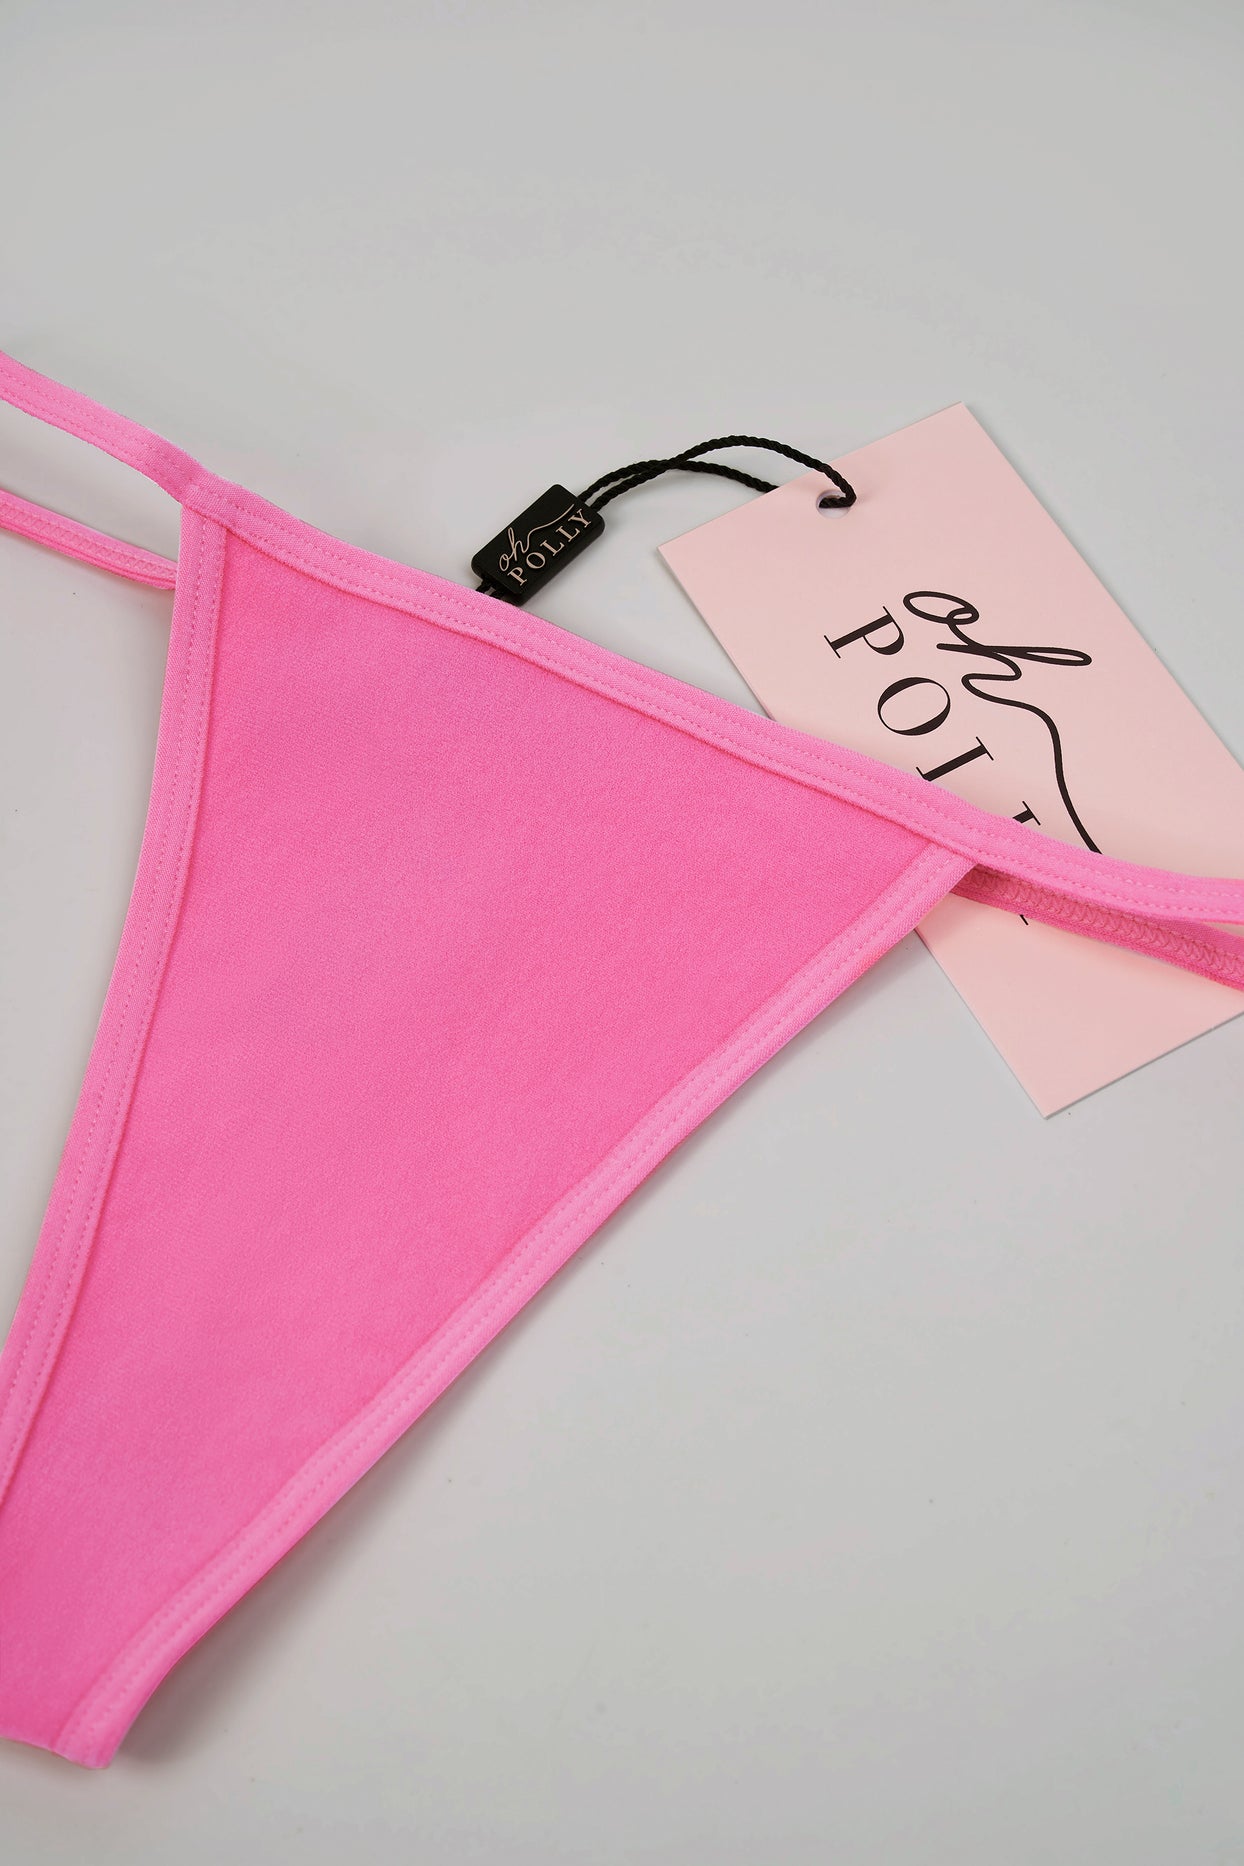 Intimates Mid-Rise Seamless Thong in Bubblegum Pink